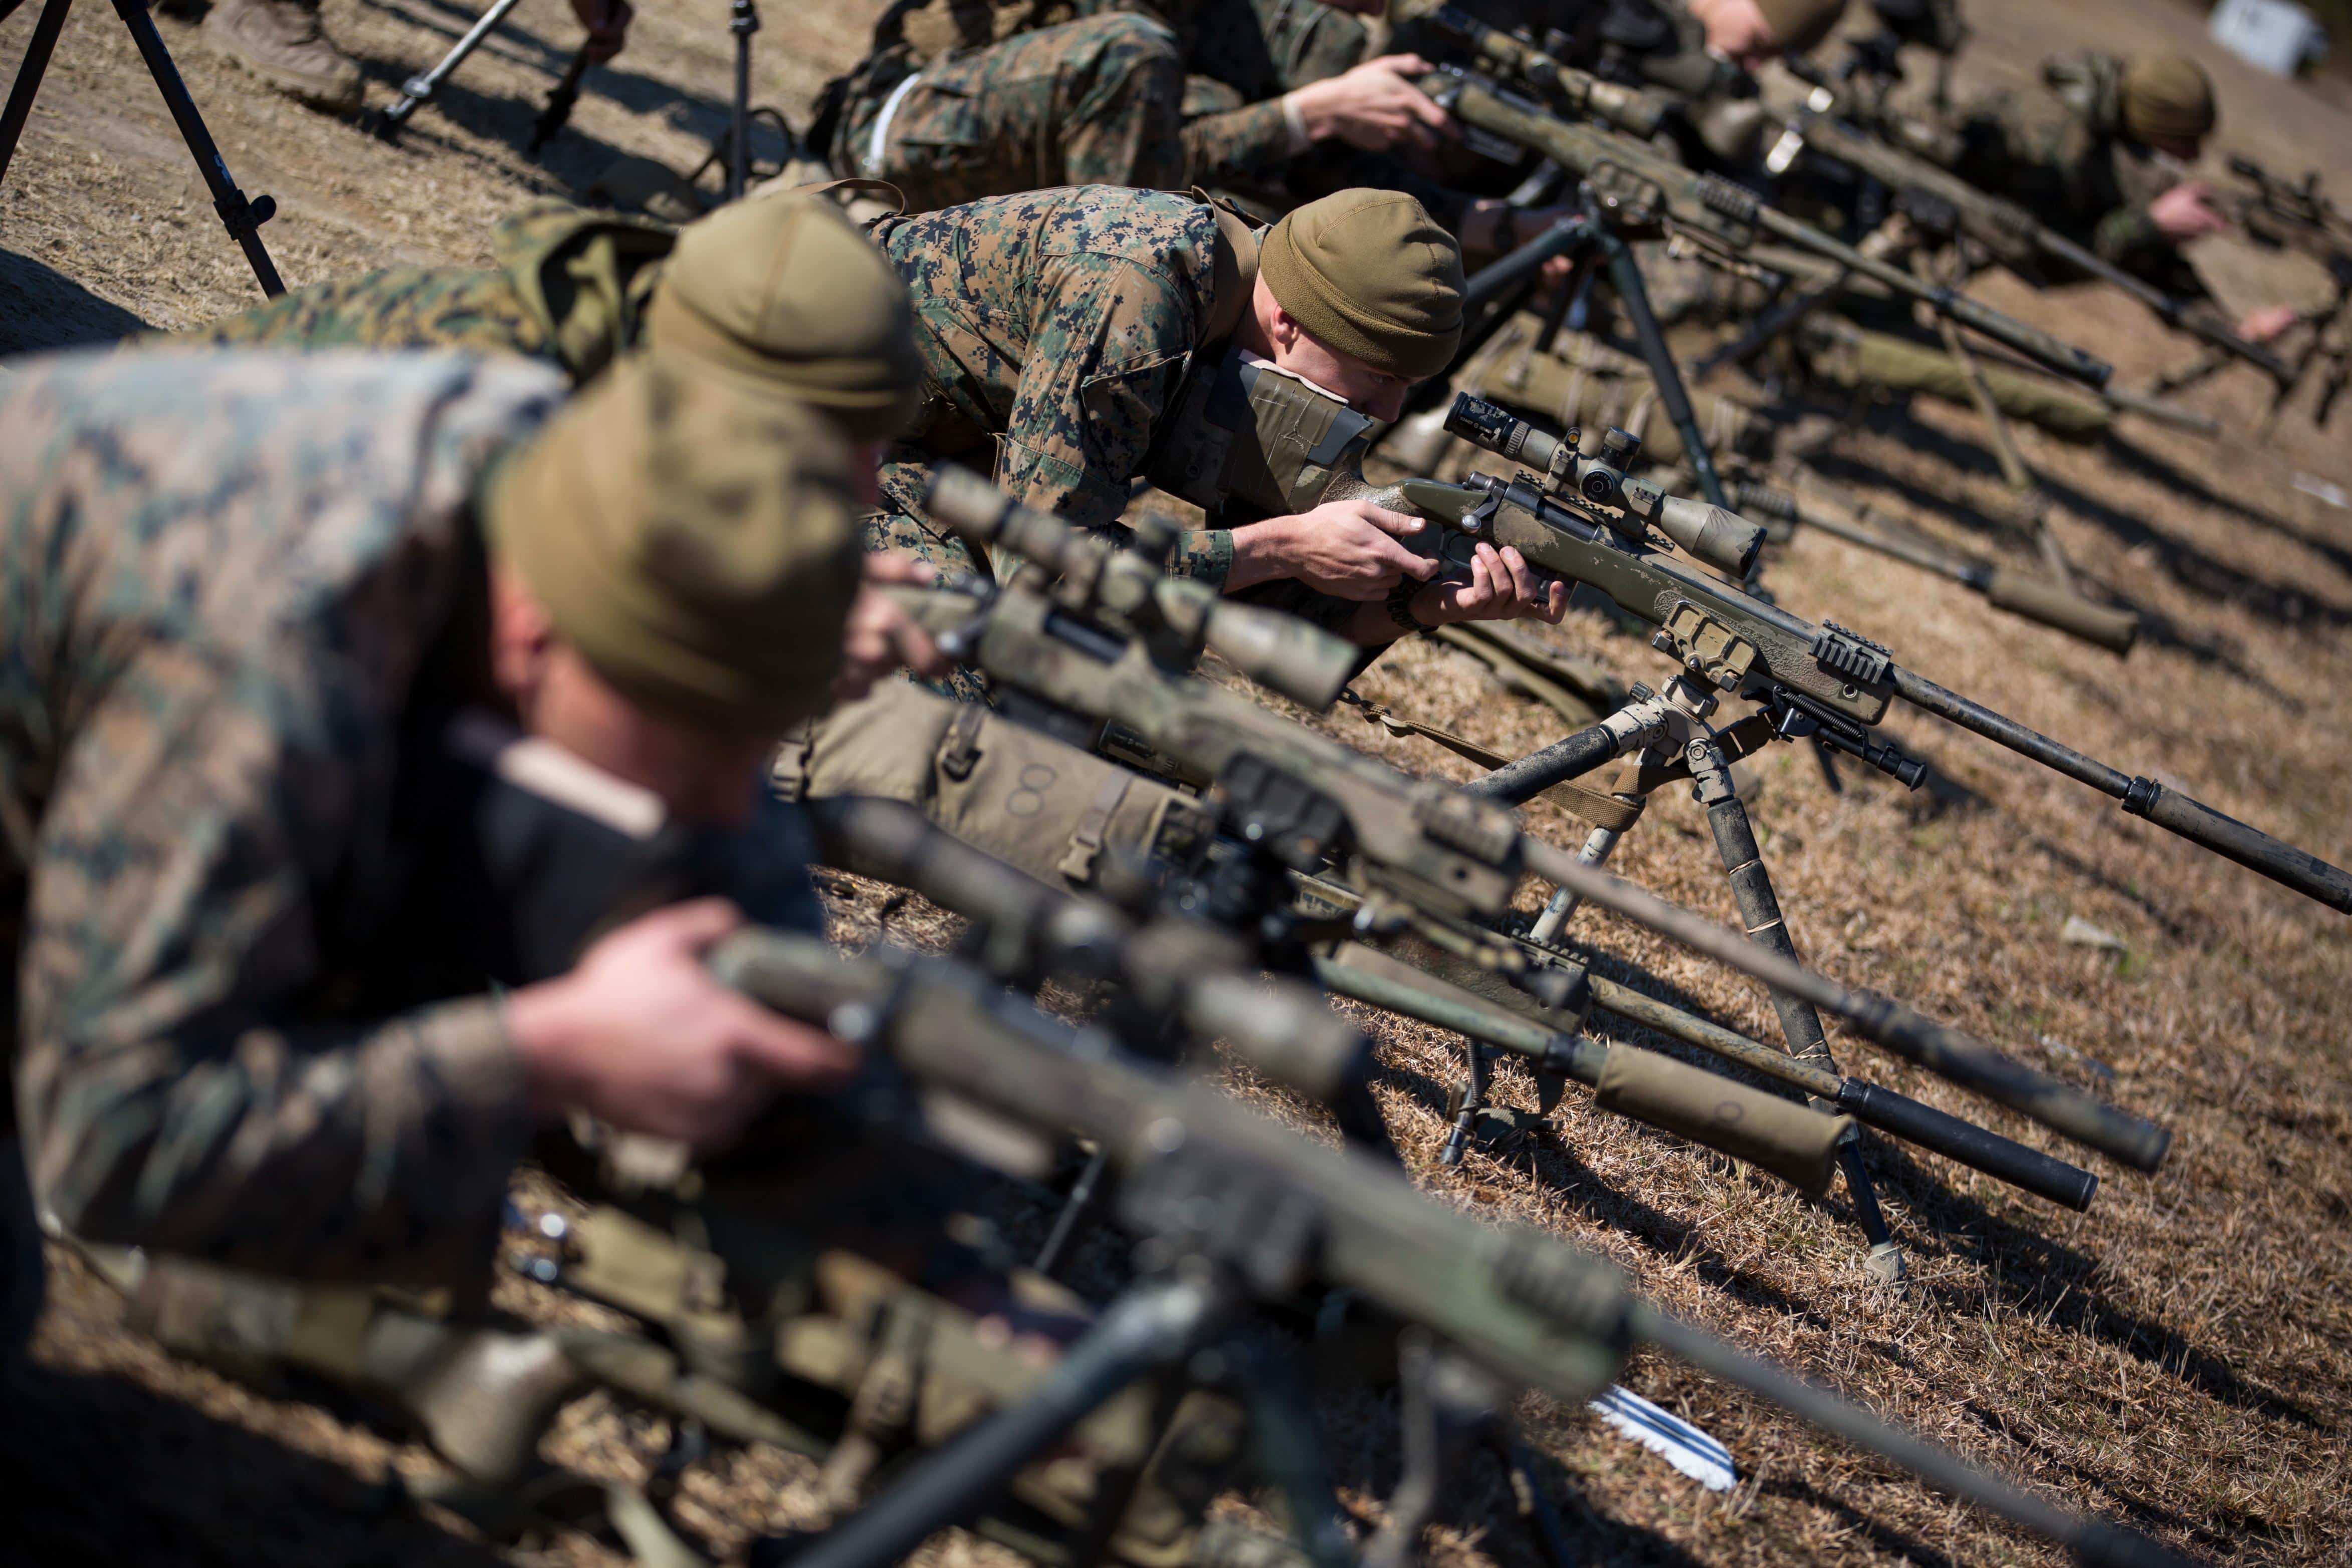 Students with the Marine Scout Sniper School, Advanced Infantry Training Battalion, School of Infantry-East, conduct a known-distance course of fire at Hathcock Range, Stone Bay, Feb. 8, 2016. Students will fire various known-distance courses of fire in order to familiarize themselves with their weapon systems. (U.S. Marine Corps photo by SOI-East Combat Camera, Cpl. Andrew Kuppers/Released)